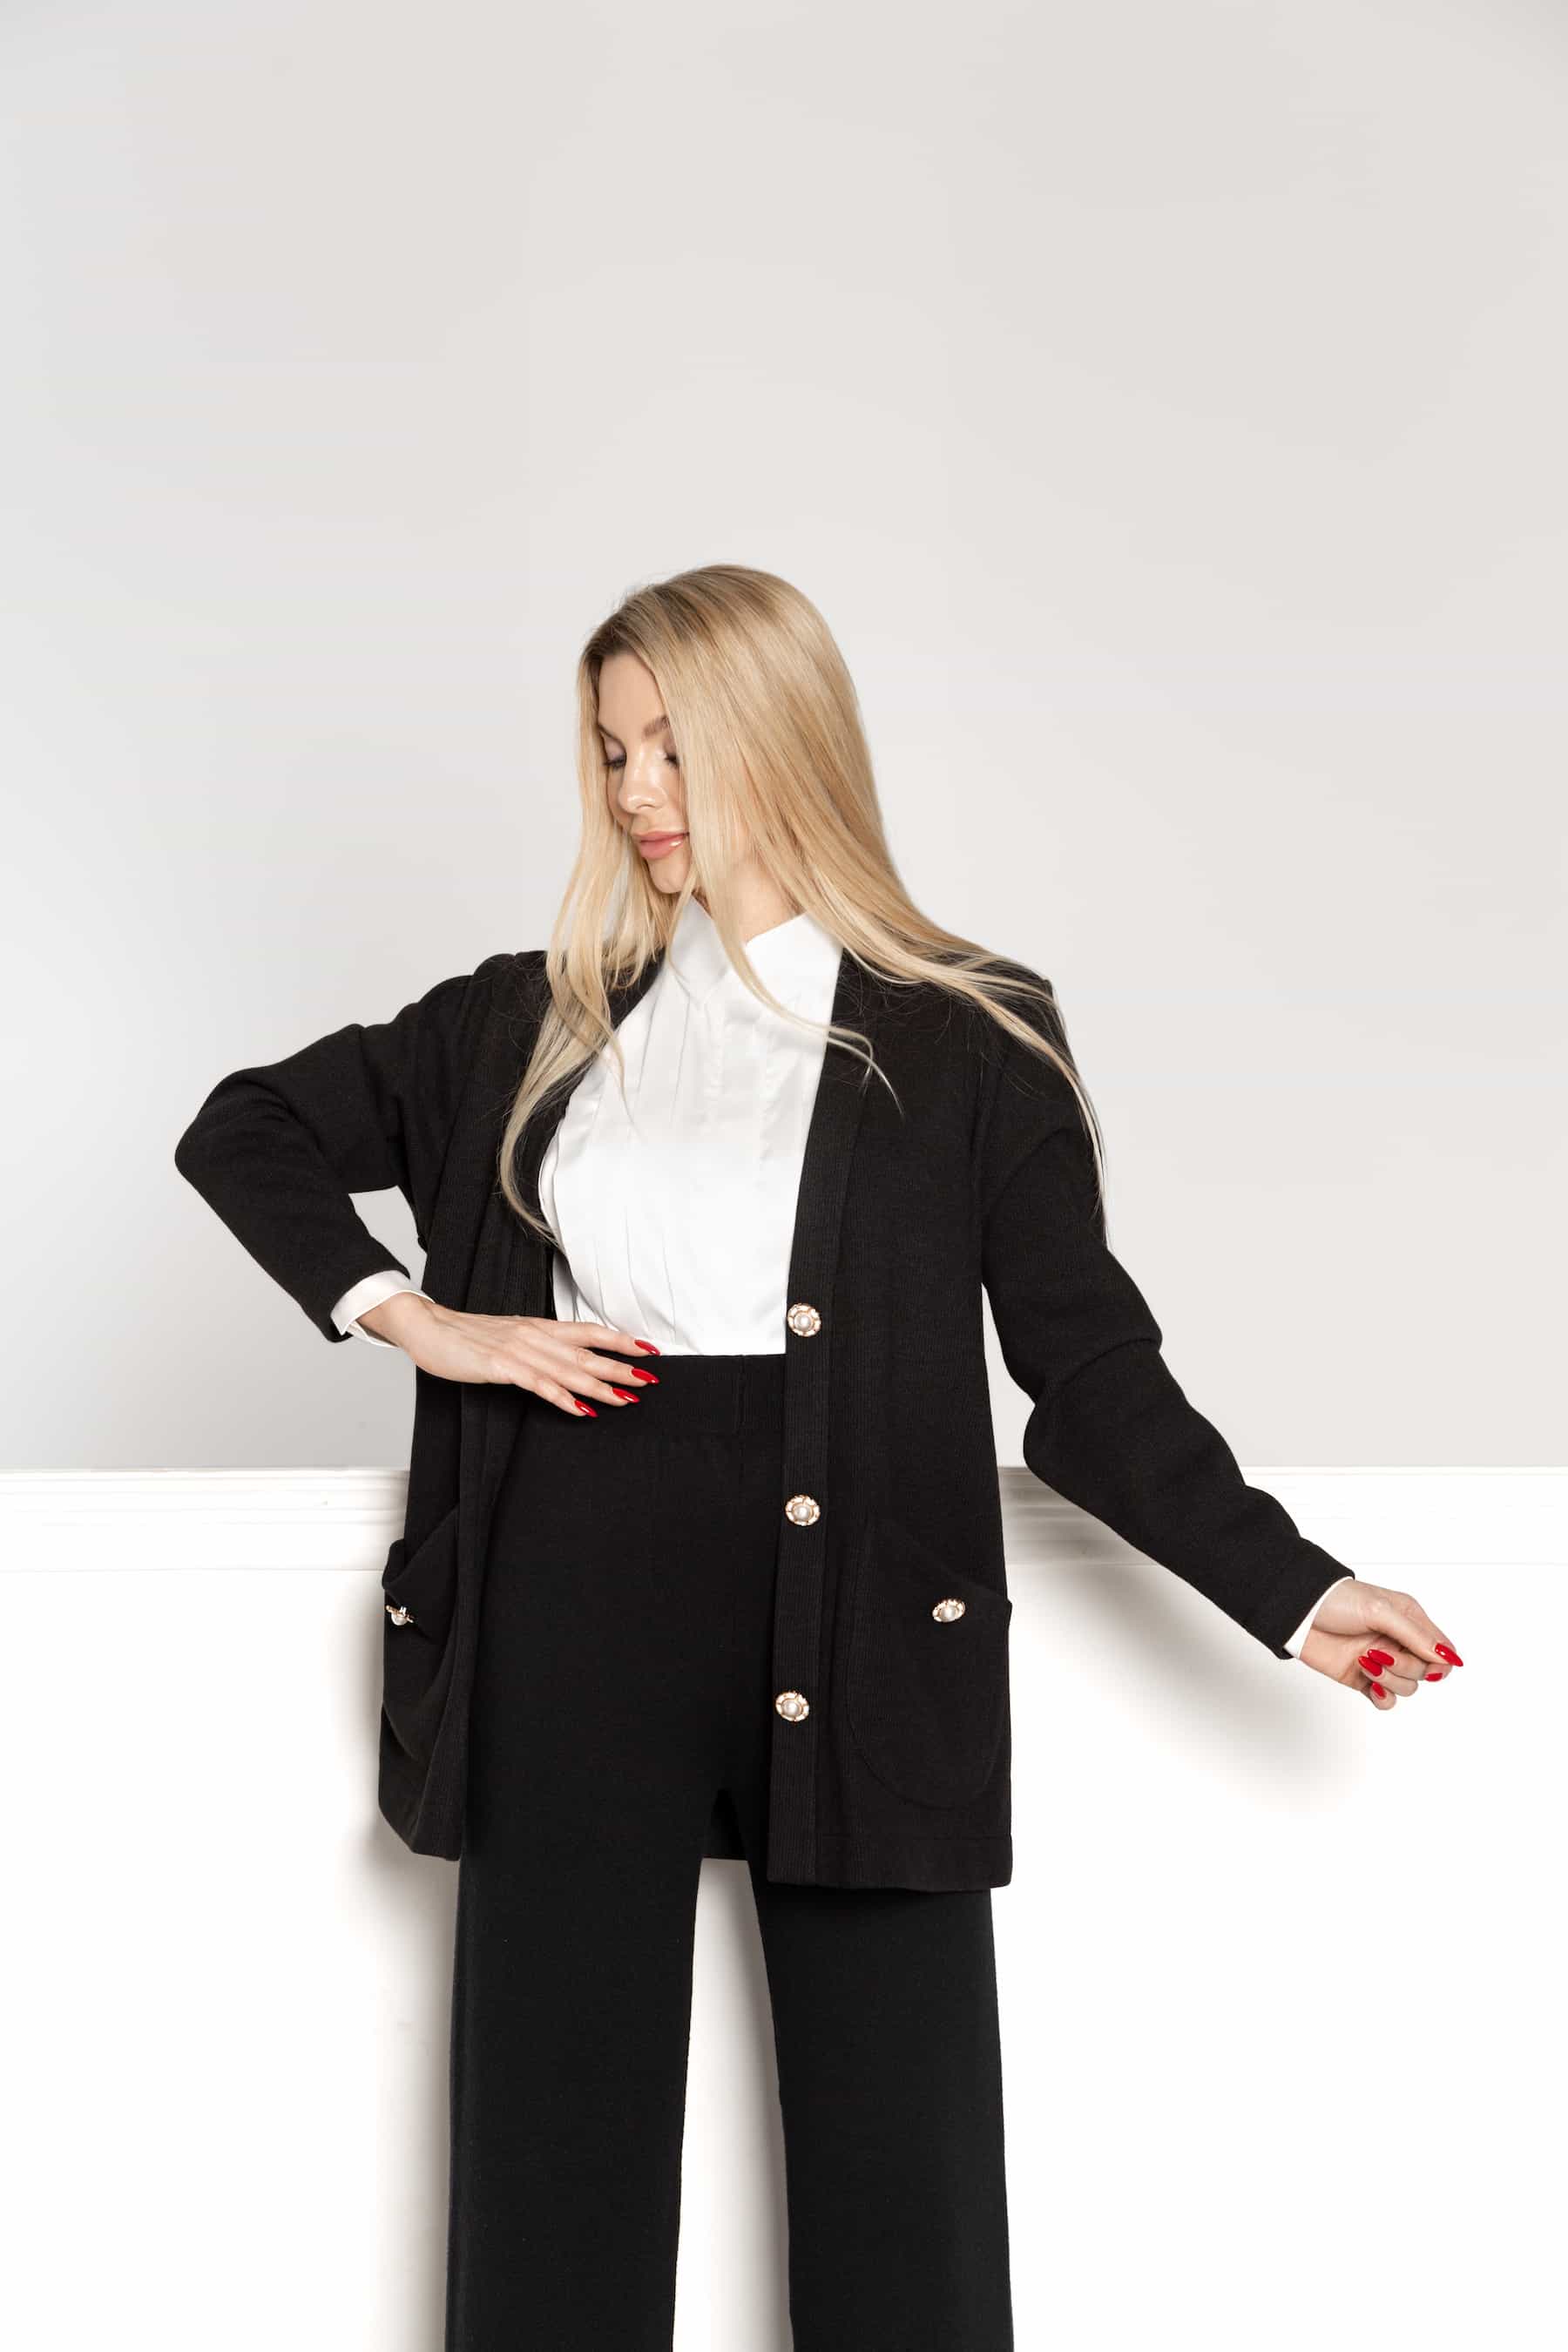 Black woolen cardigan with pockets and large buttons